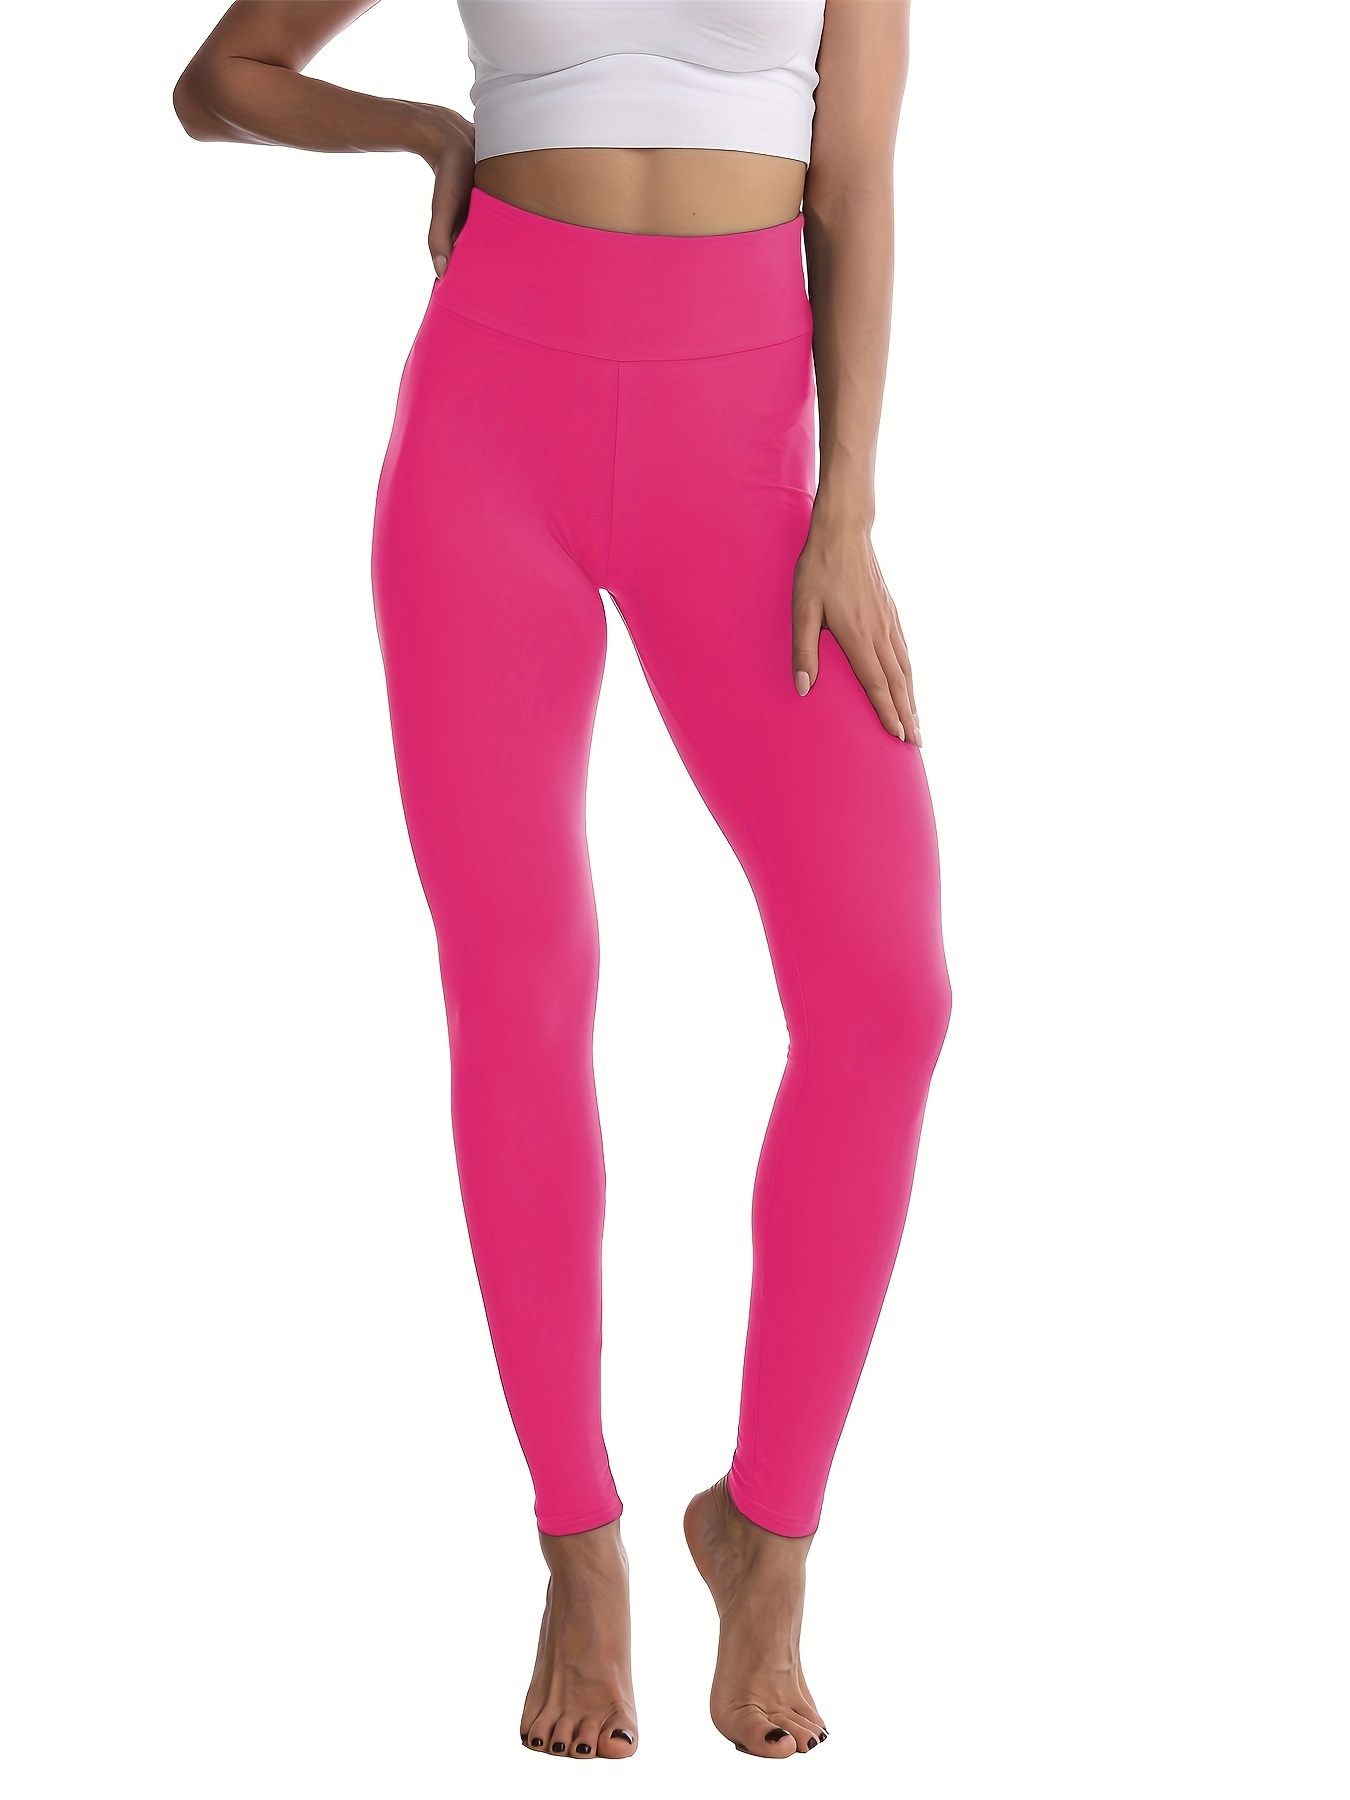  FRODOTGV Hot Pink Plain Yoga Leggings for Women High Waist  Fitness Tummy Control Leggings for Women X-Small : Clothing, Shoes & Jewelry